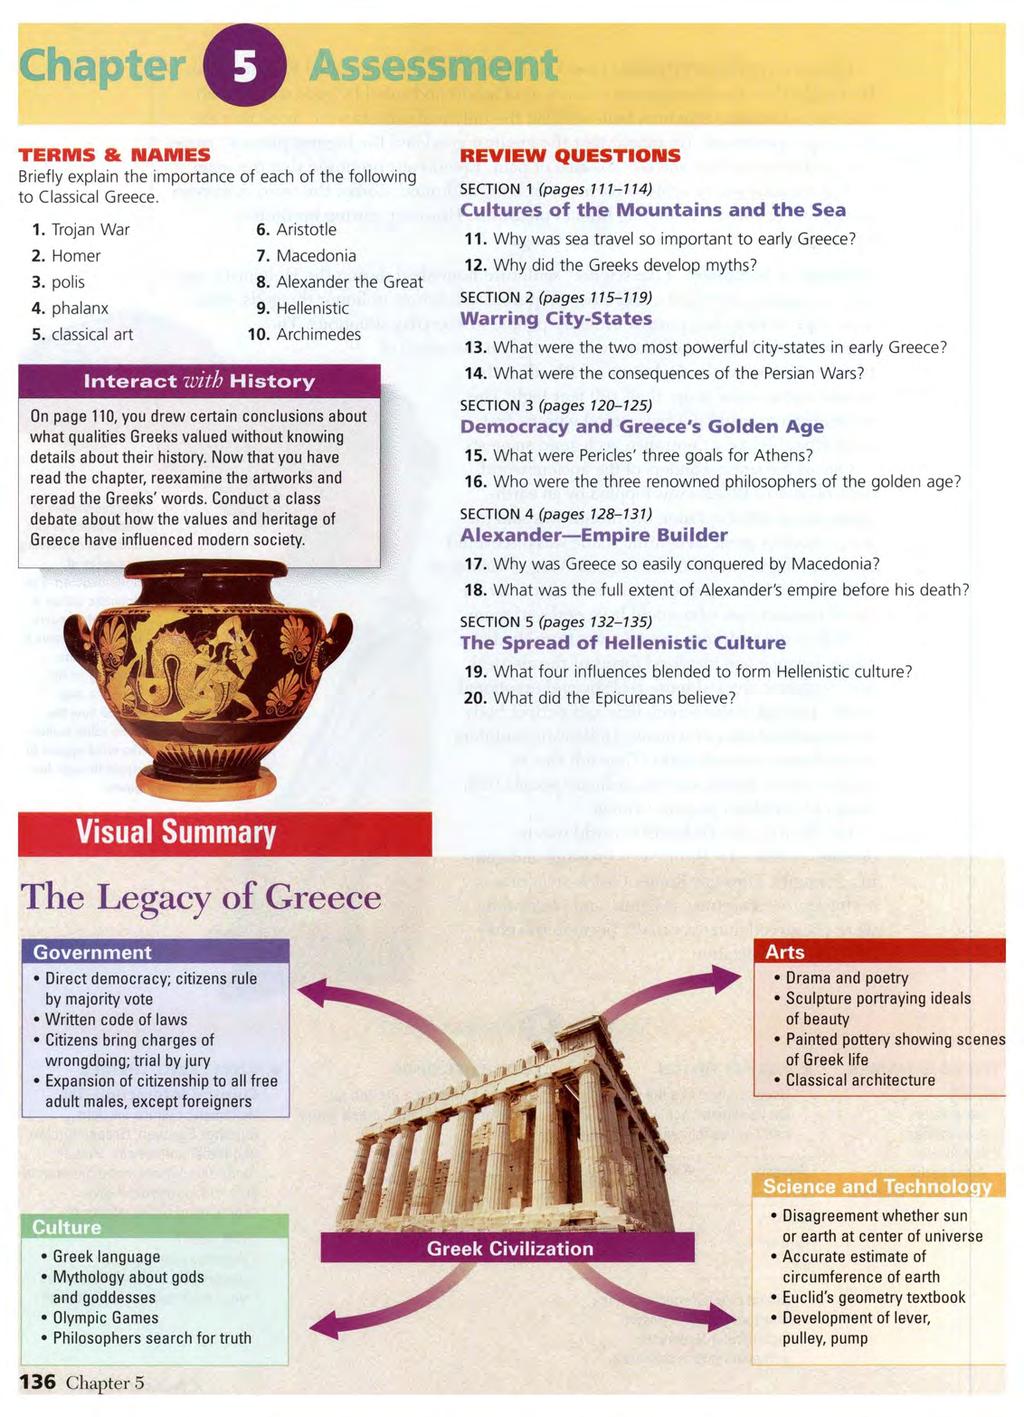 TERMS & NAMES Briefly explain the importance of each of the following to Classical Greece. 1. Trojan War 2. Homer 3. polls 4. phalanx 5. classical art 6. Aristotle 7. Macedonia 8.